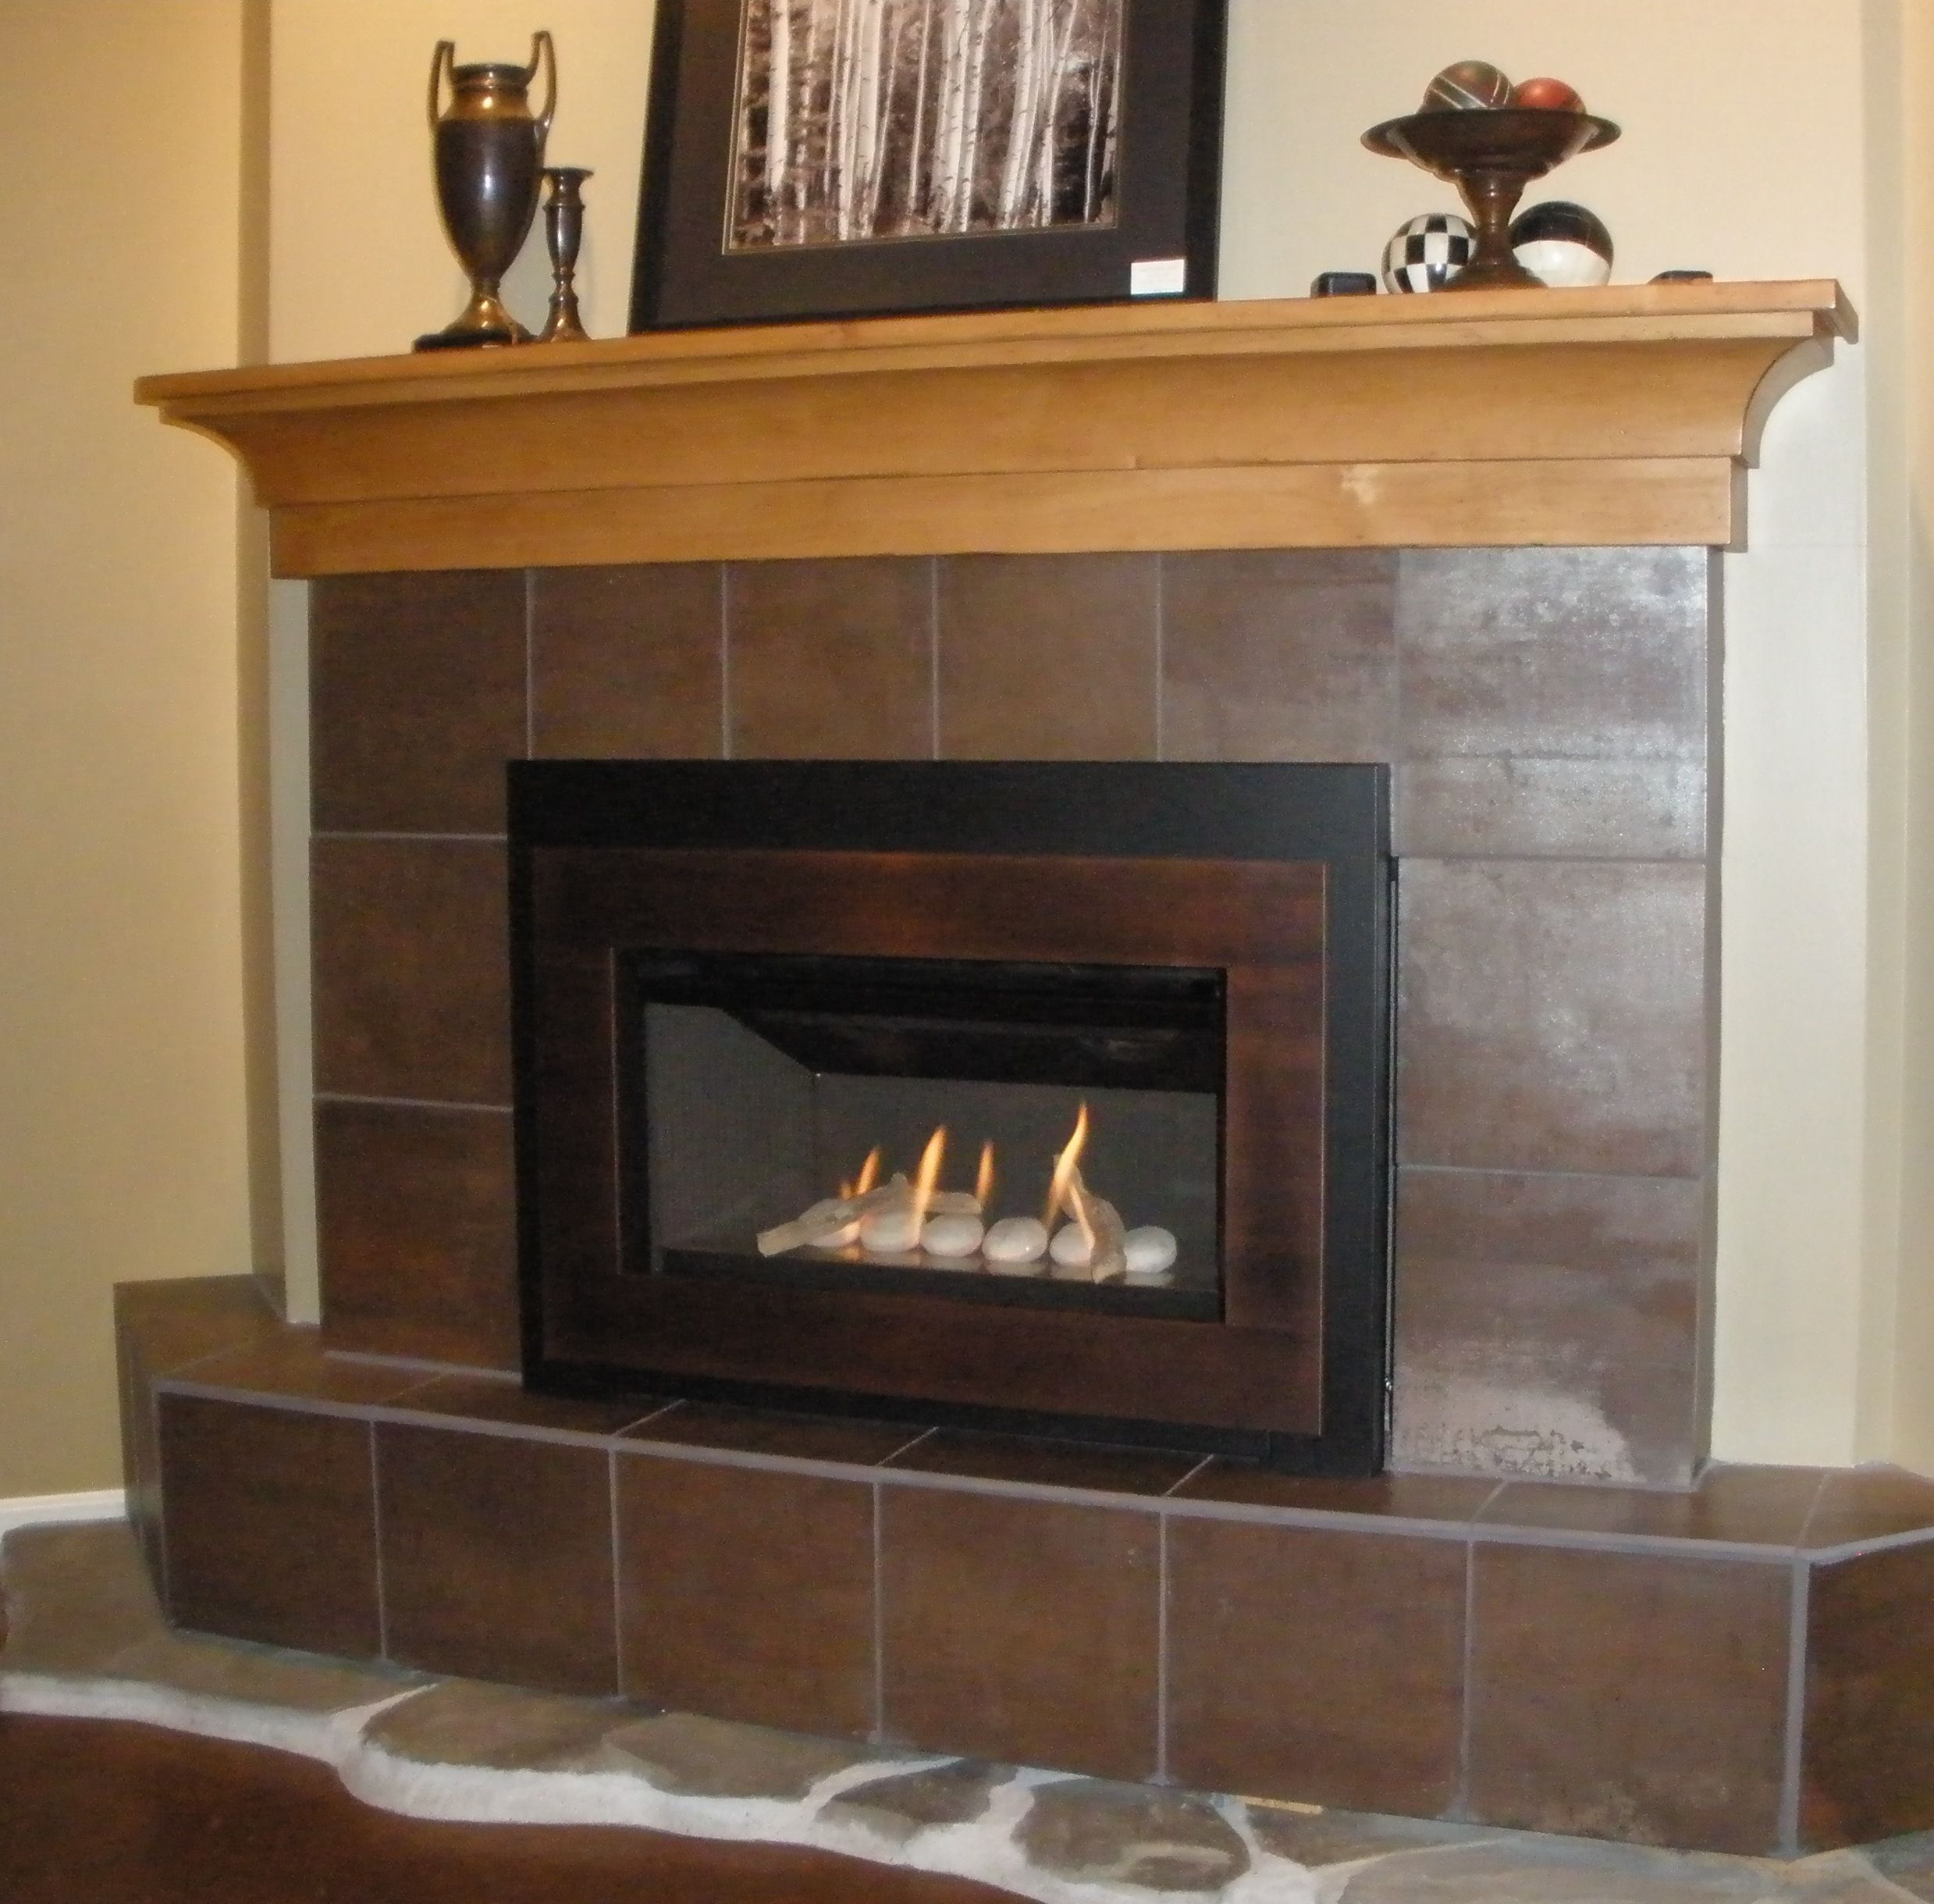 Gas Fireplace Heater Insert Beautiful Pin On Valor Radiant Gas Fireplaces Midwest Dealer